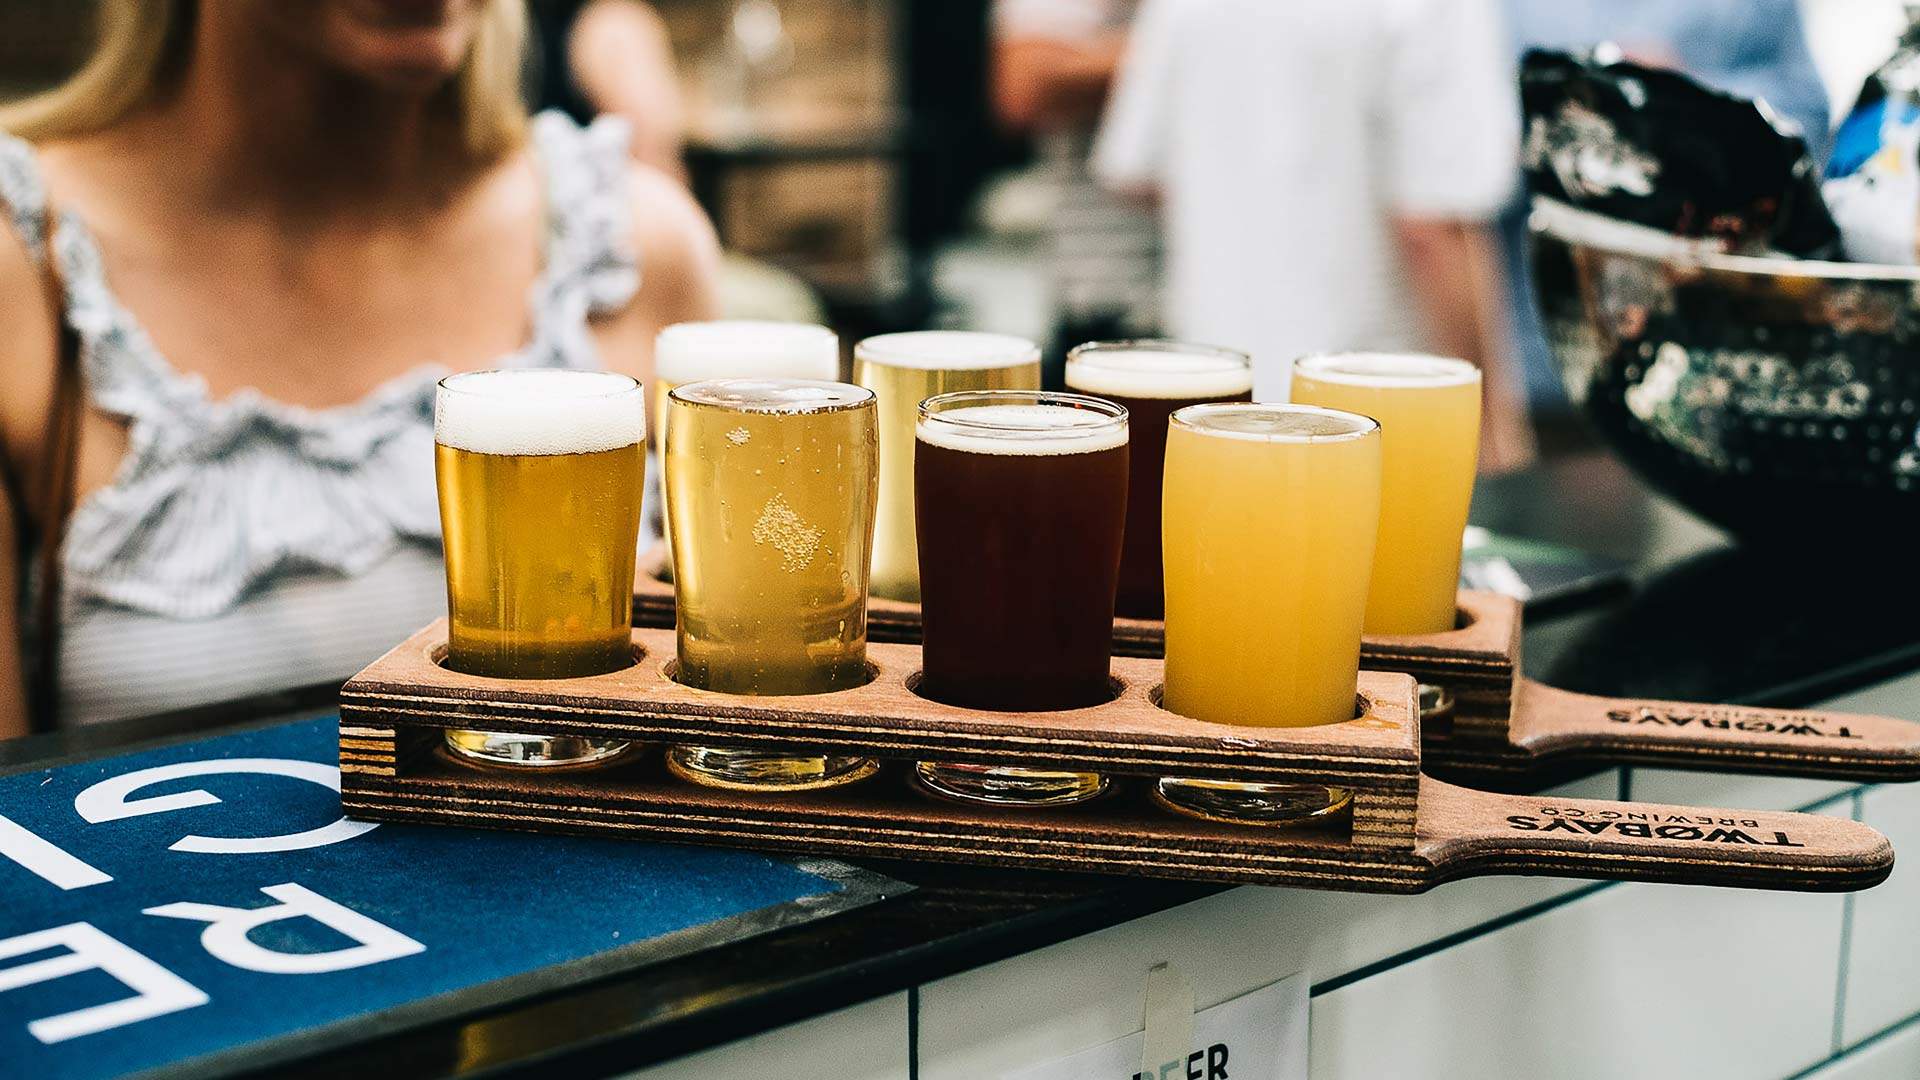 A Gluten-Free Craft Brewery and Taproom Has Opened on the Mornington Peninsula